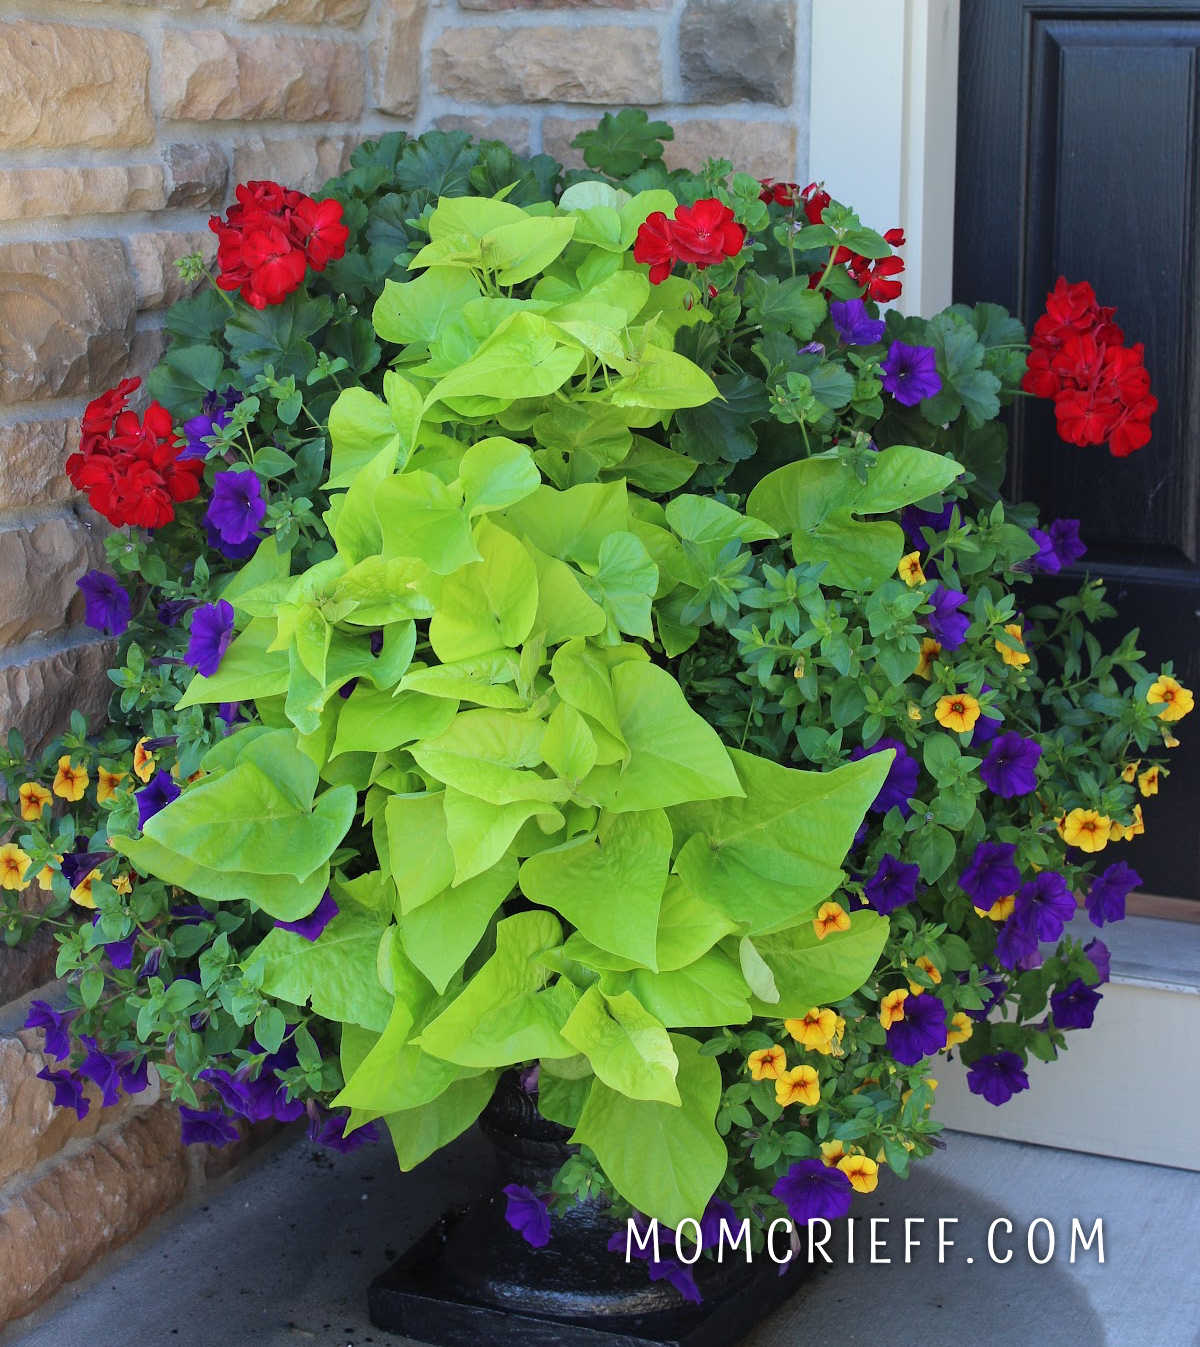 Beautiful front porch planter with red geraniums, sweet potato vines, purple petunias and yellow million bells.